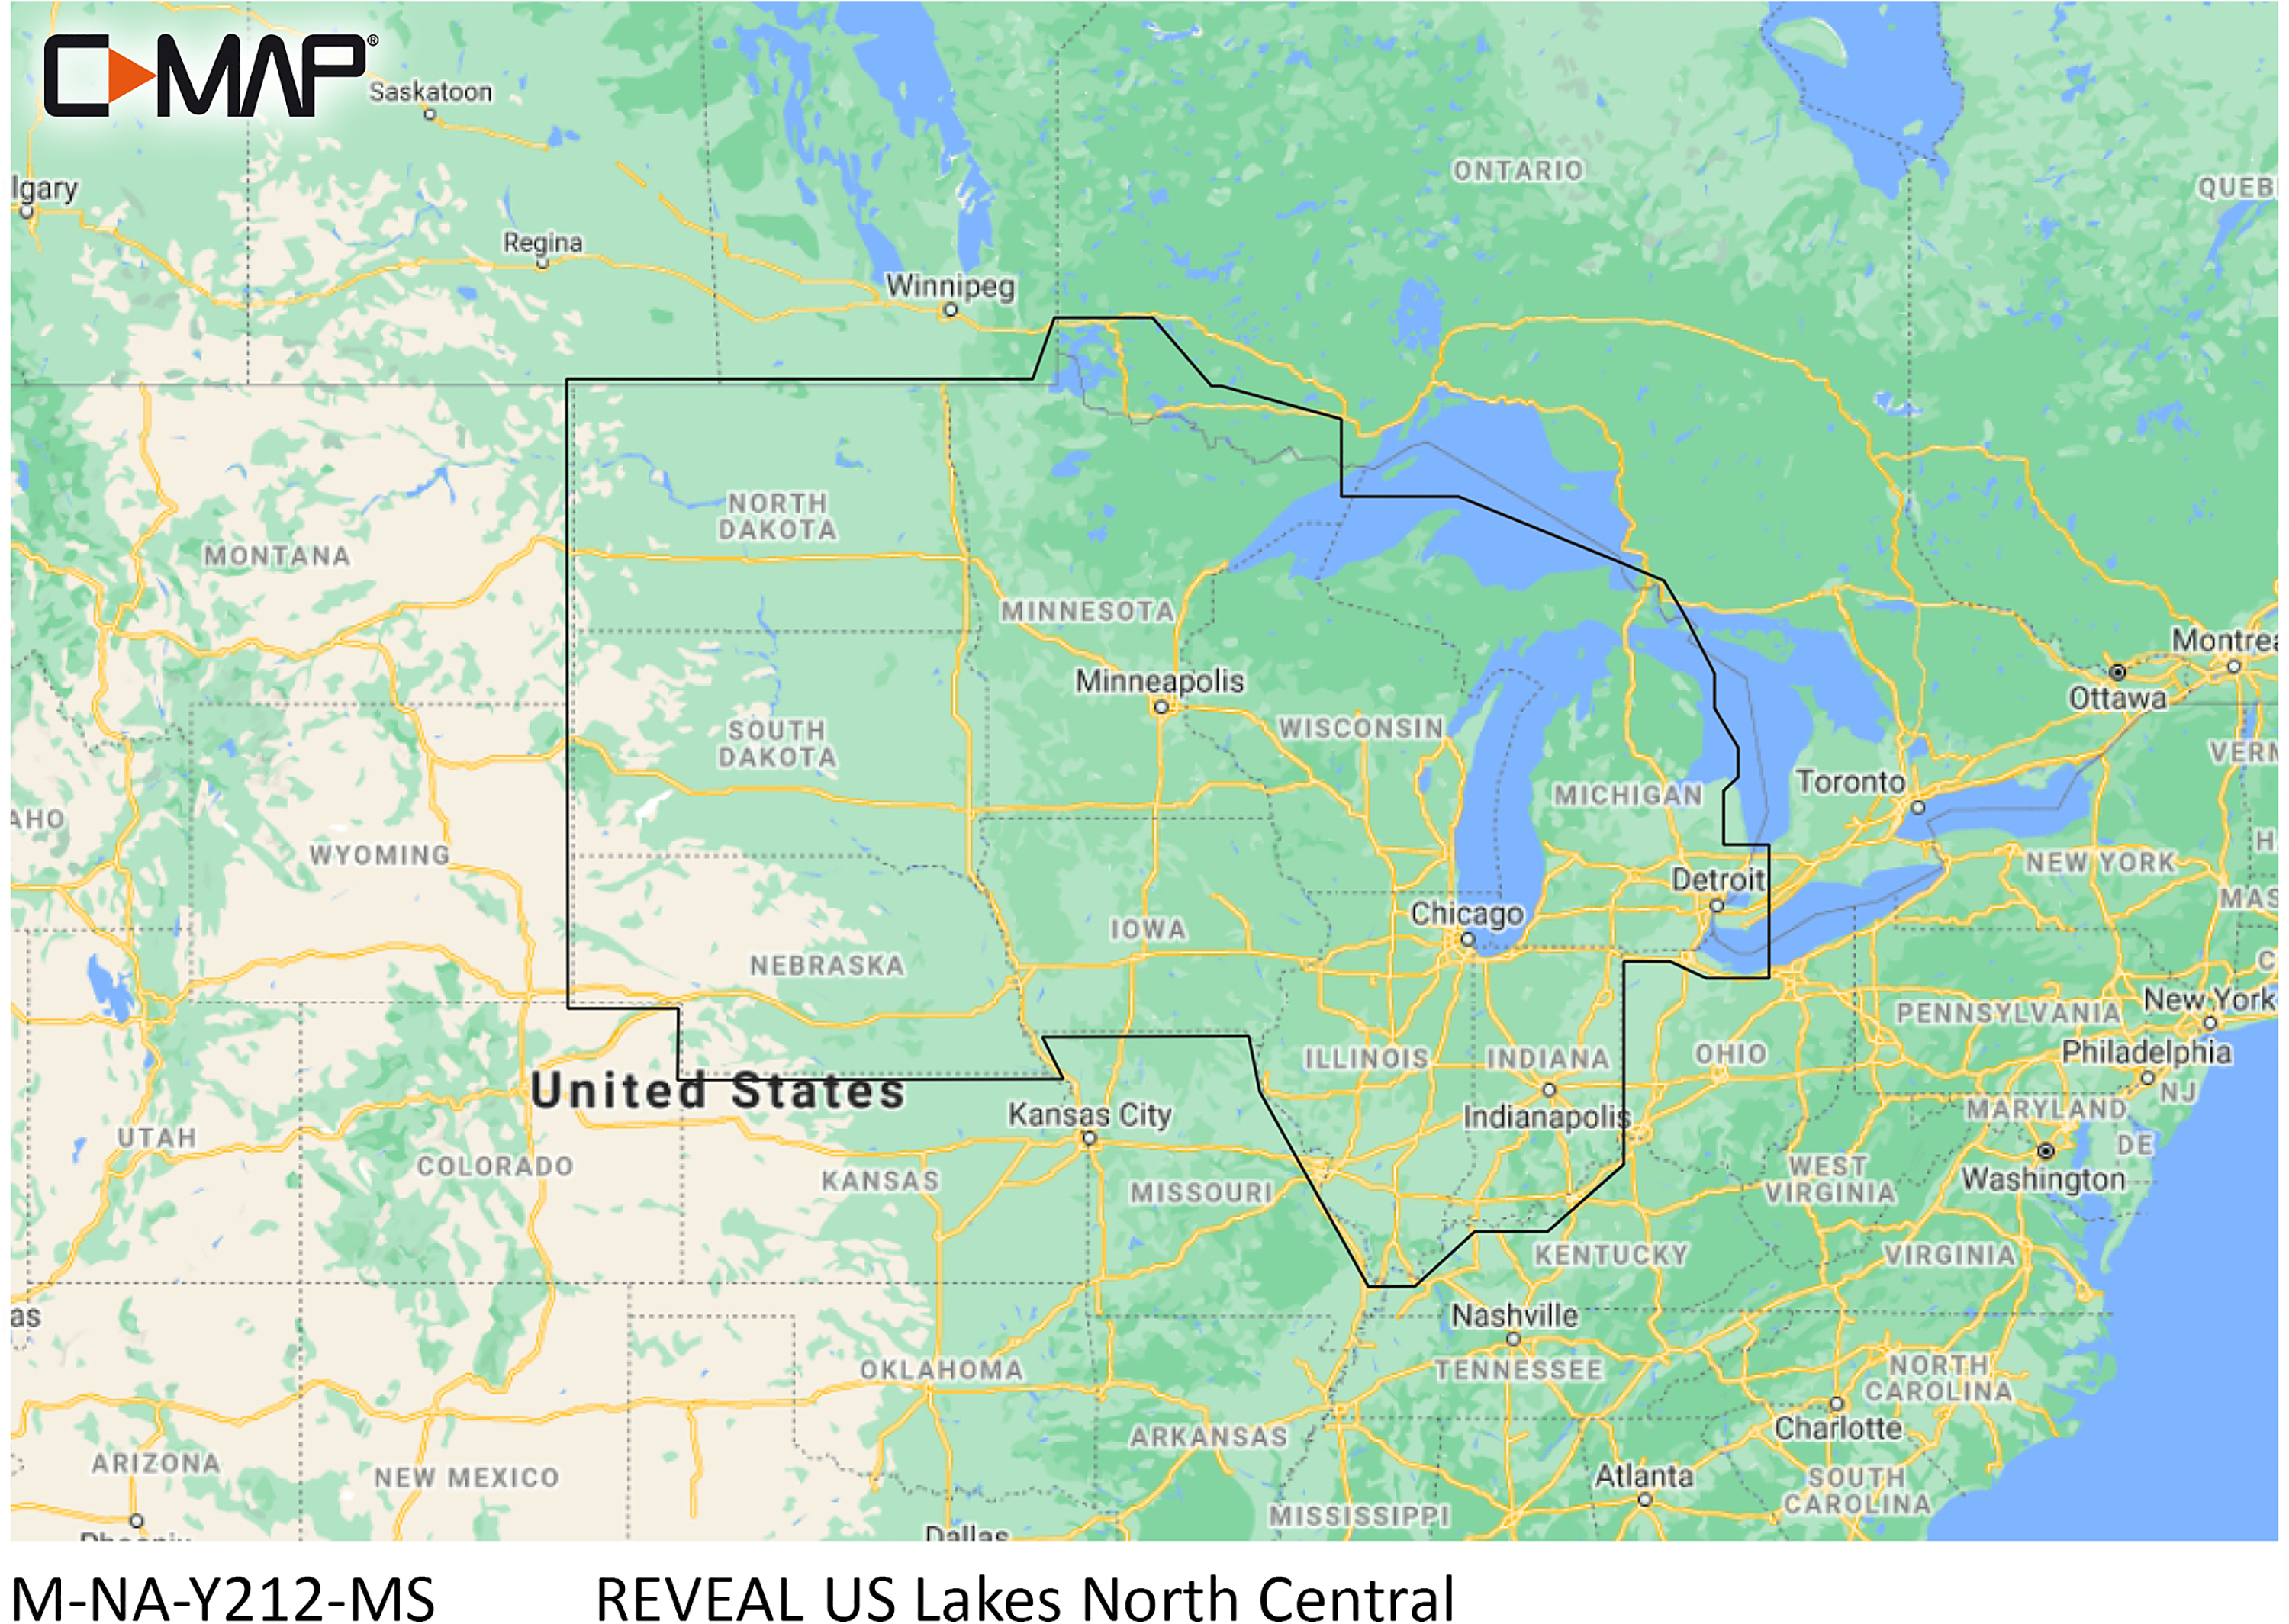 C-MAP Reveal SD Card Map Chart - US Lakes - North Central